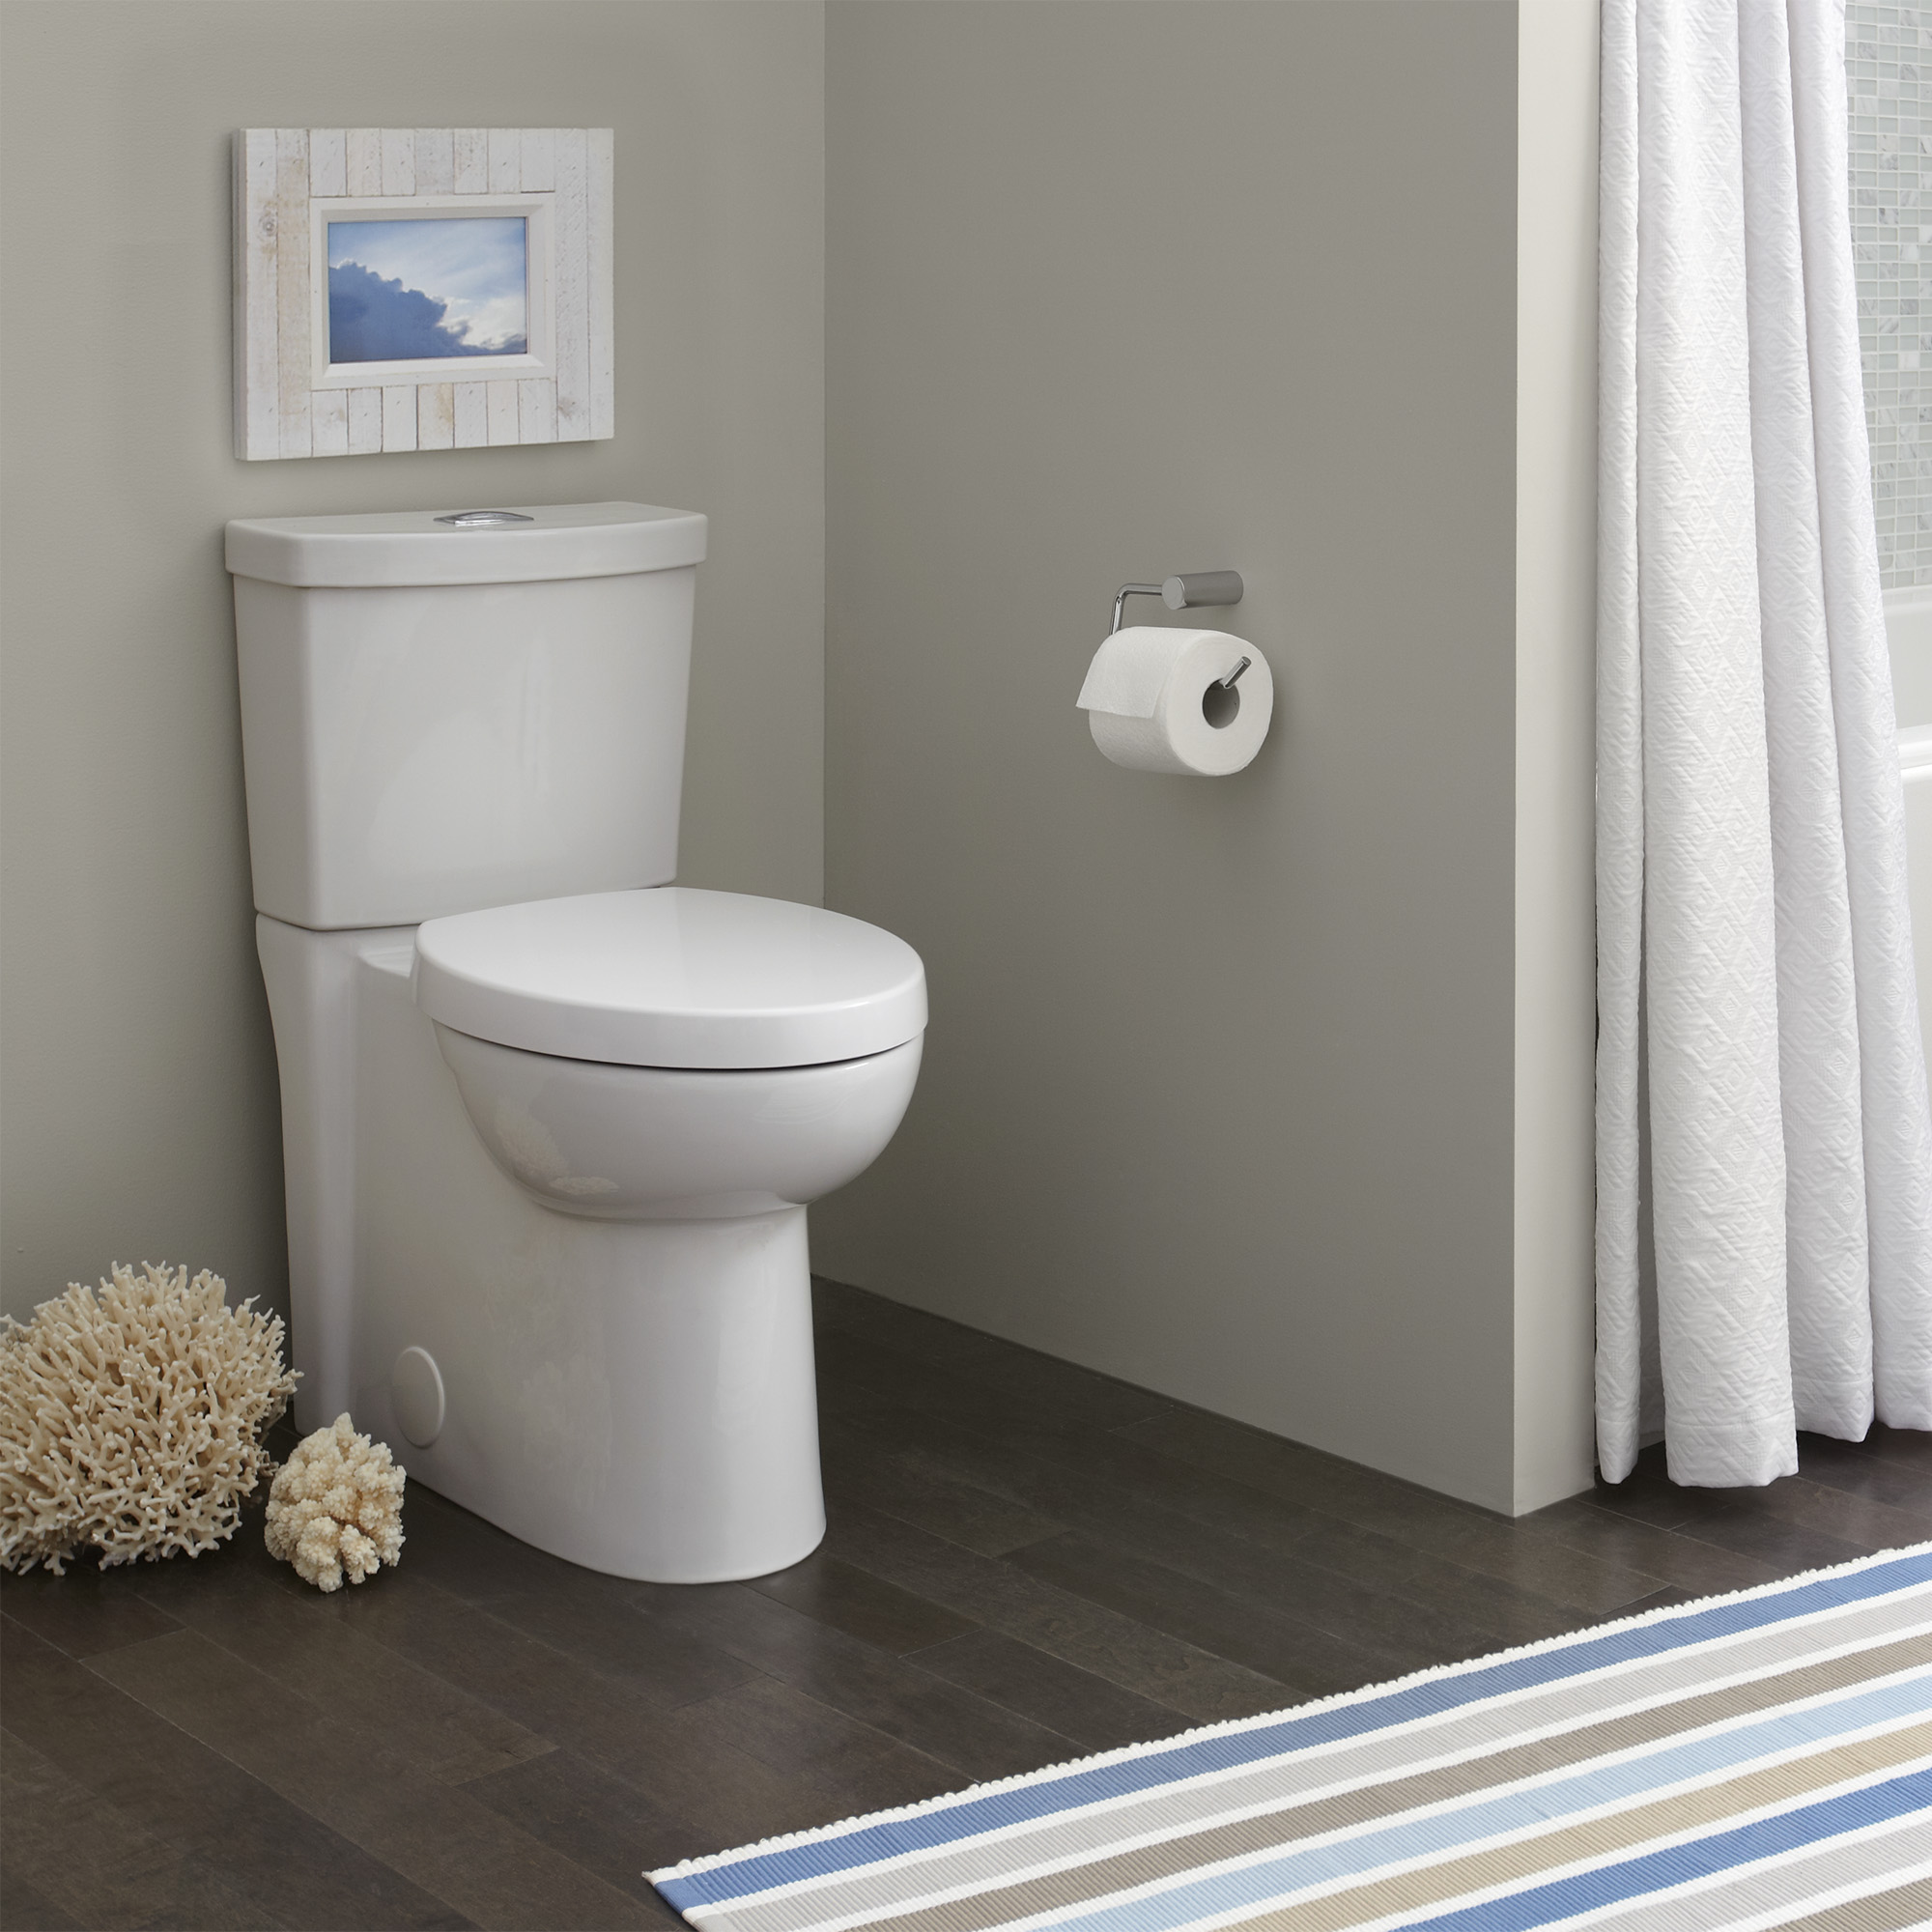 Studio® Skirted Two-Piece Dual Flush 1.6 gpf/6.0 Lpf and 1.1 gpf/4.2 Lpf Chair Height Elongated Toilet With Seat